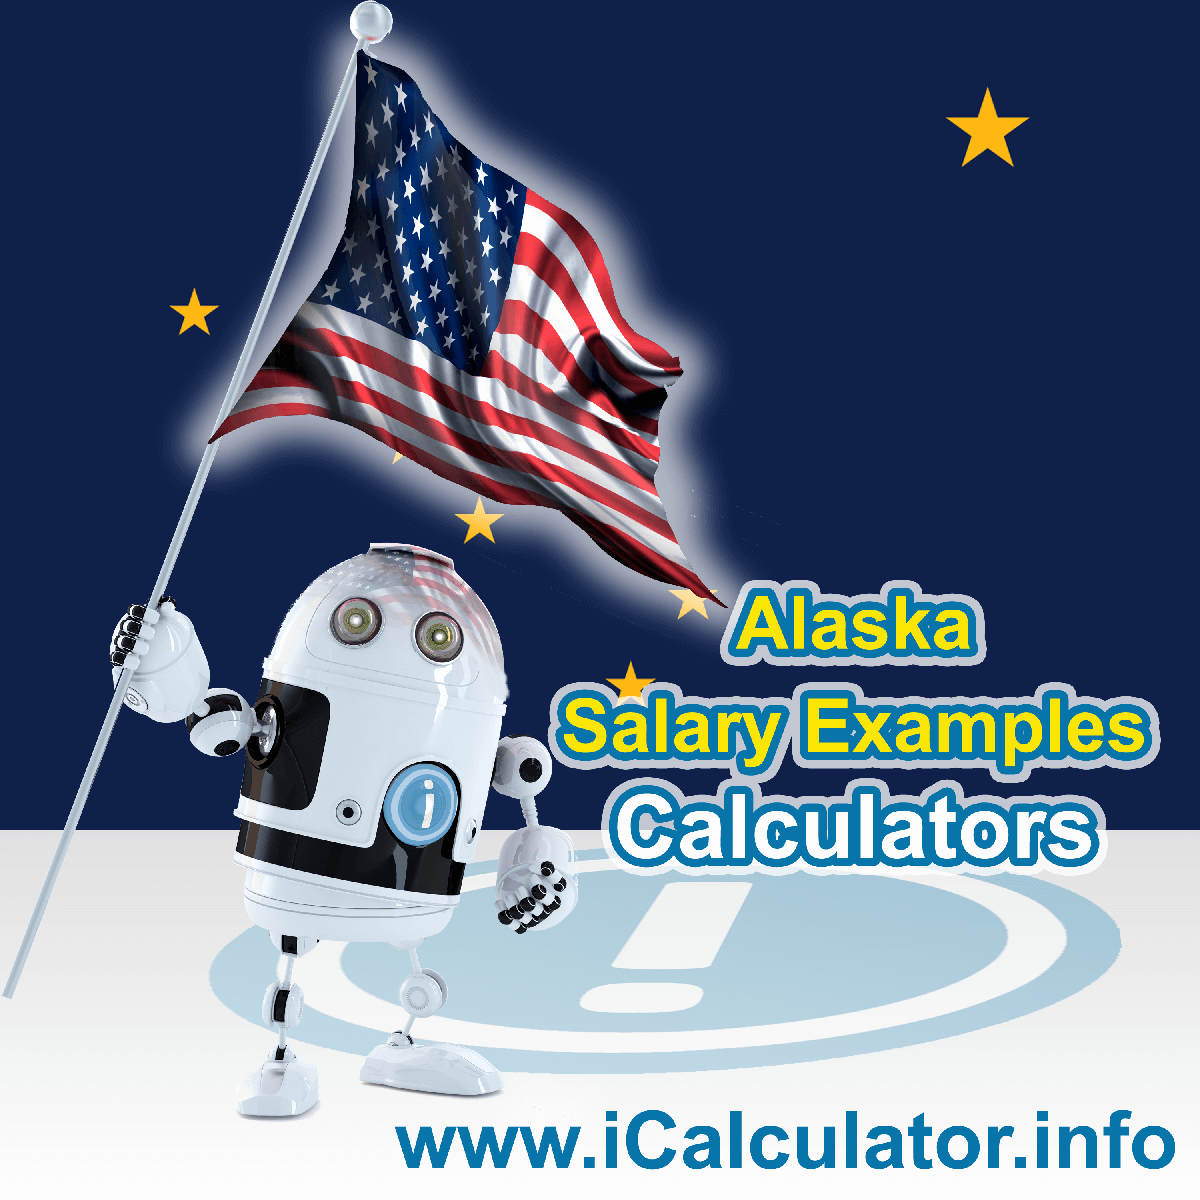 Alaska Salary Example for $ 180,000.00 in 2023 | iCalculator™ | $ 180,000.00 salary example for employee and employer paying Alaska State tincome taxes. Detailed salary after tax calculation including Alaska State Tax, Federal State Tax, Medicare Deductions, Social Security, Capital Gains and other income tax and salary deductions complete with supporting Alaska state tax tables 